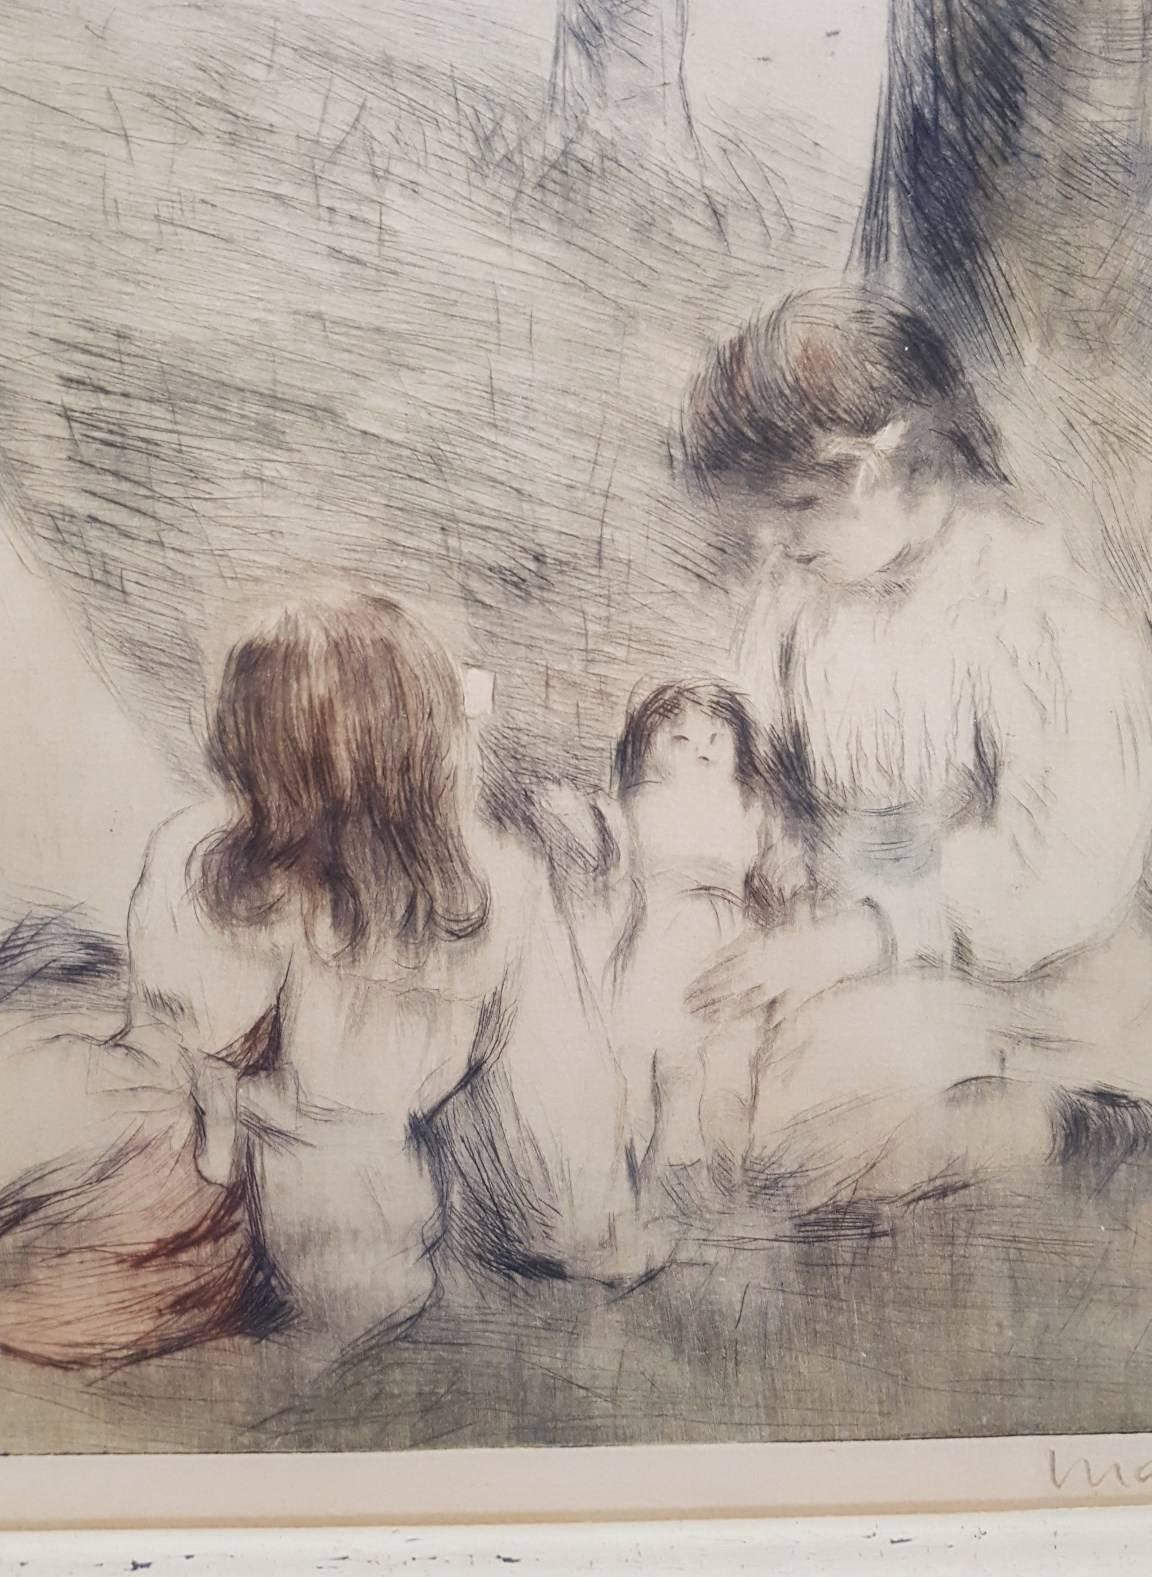 An original signed drypoint etching with aquatint by French artist Manuel Robbe (1872-1936) titled "Les Mamans", 1904. Signed by Robbe lower right and pencil numbered "No. 13" lower left. Limited edition: 65. Reference: Merrill